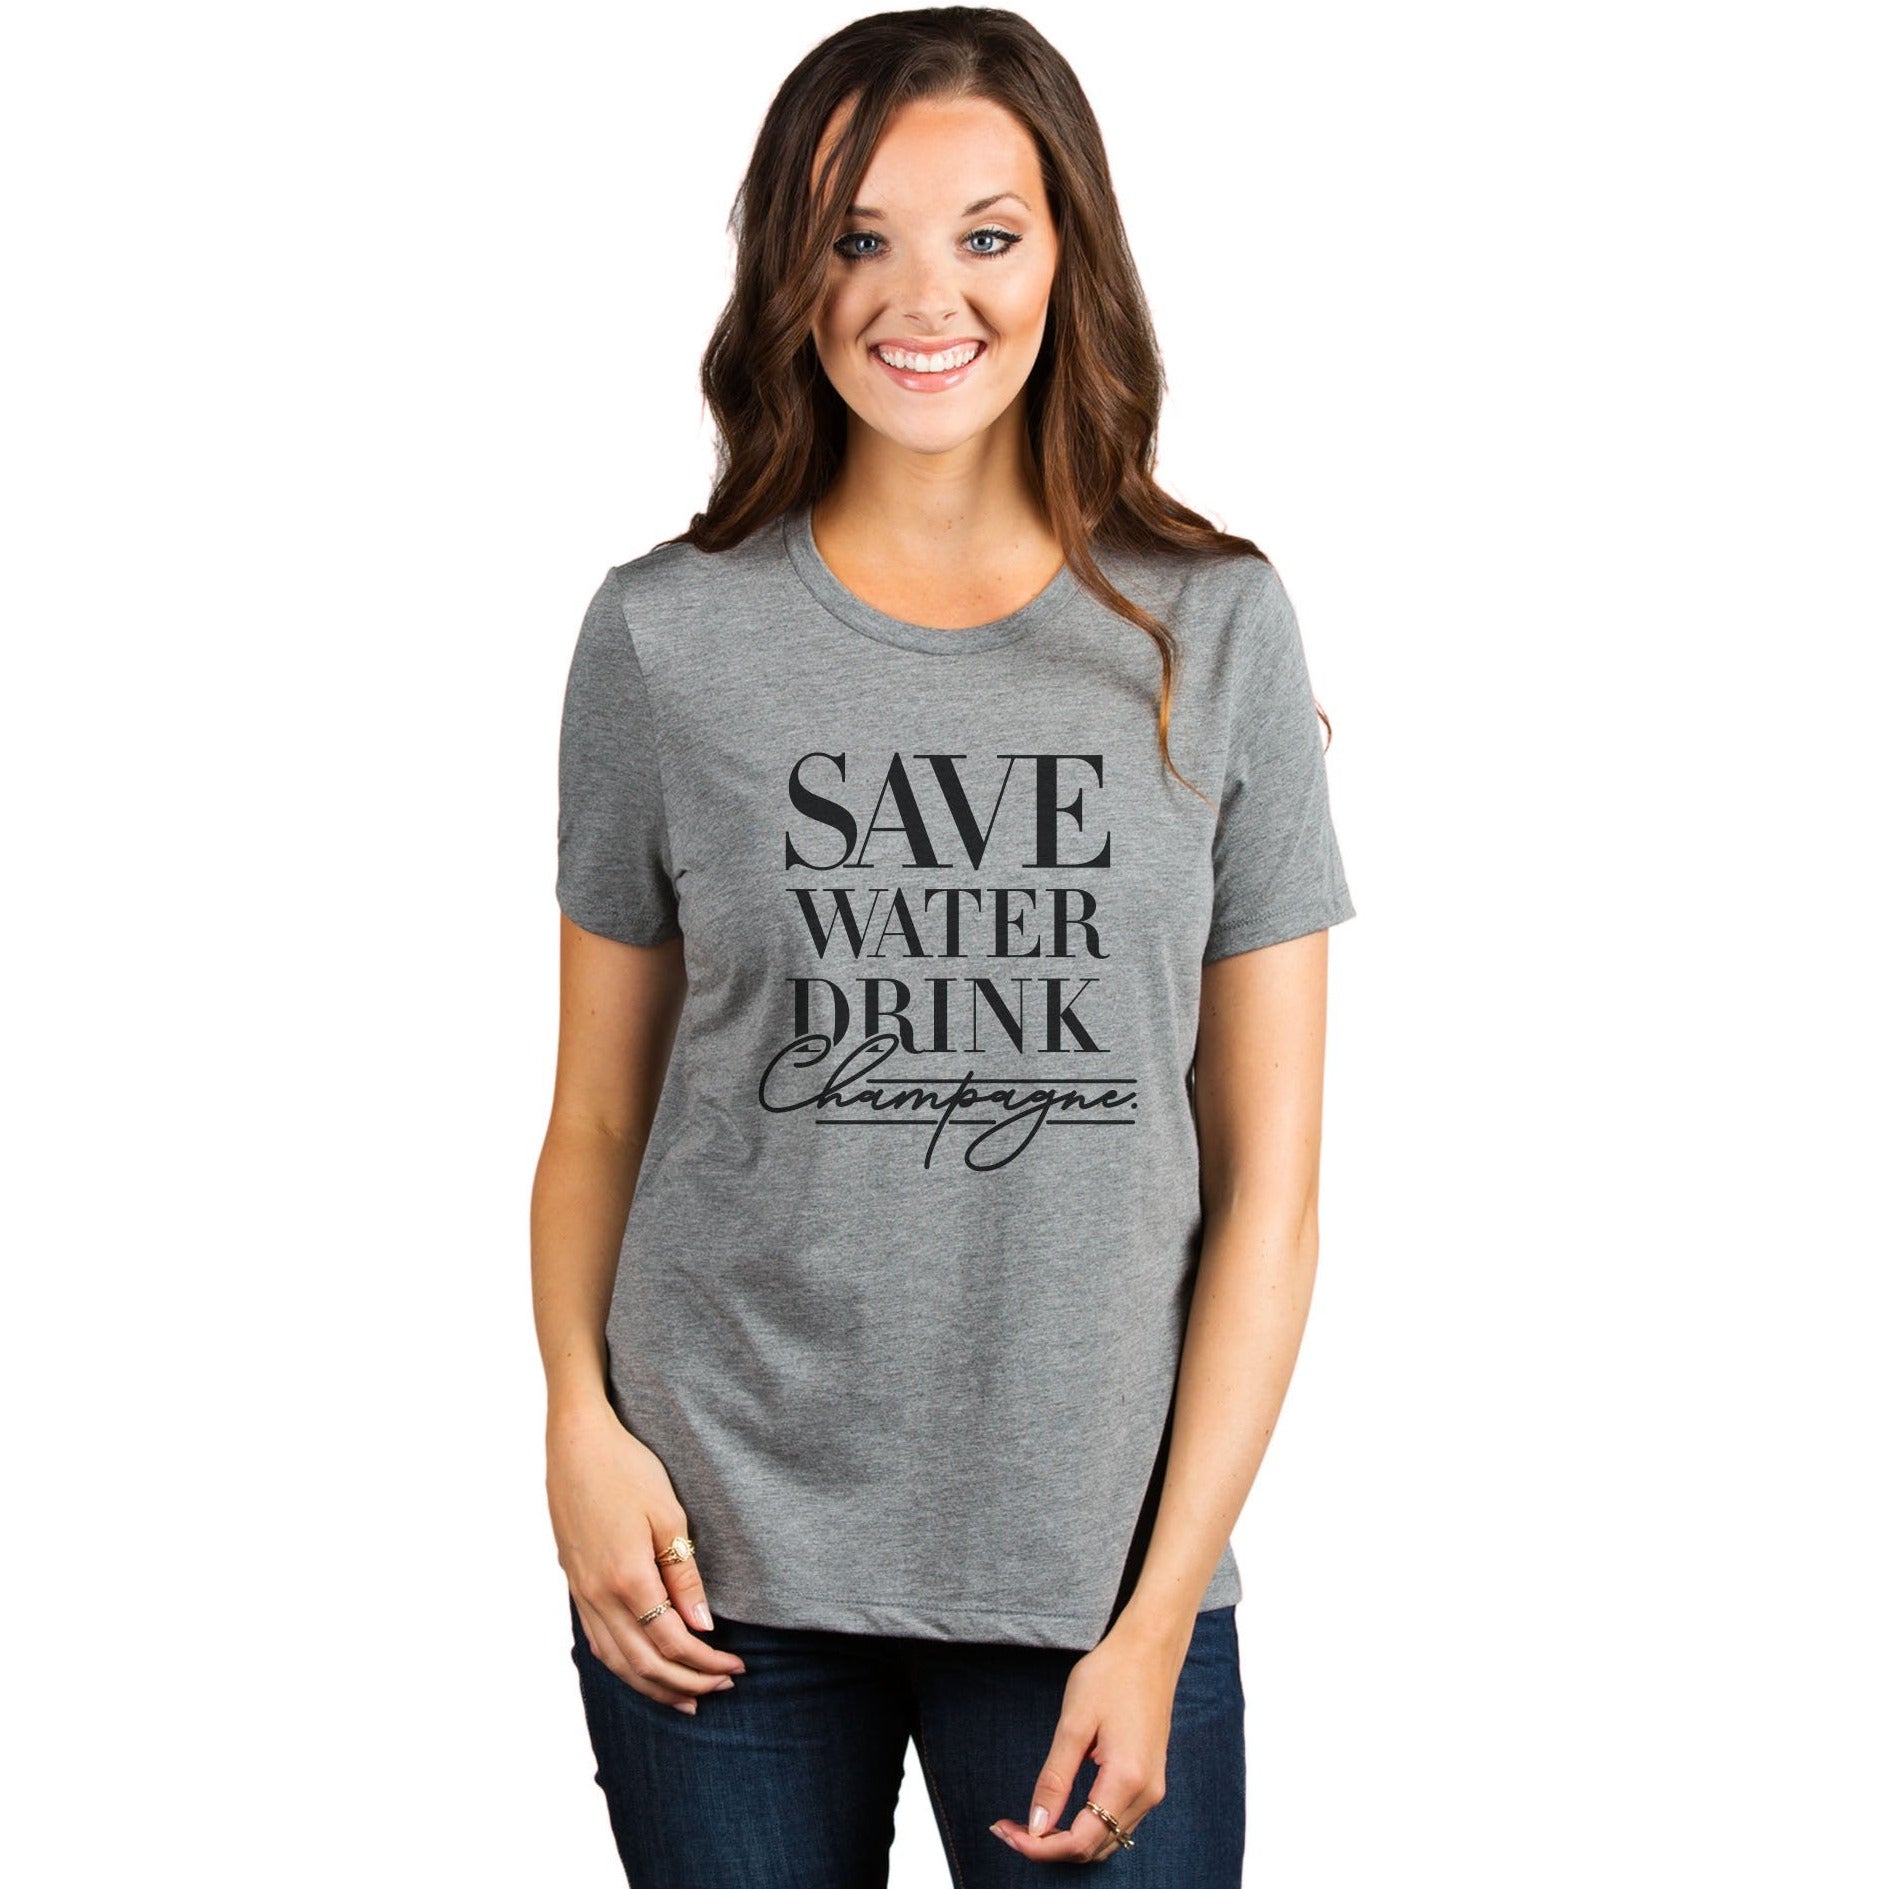 Save Water Drink Champagne Women's Relaxed Crewneck T-Shirt Top Tee Heather Grey Model
